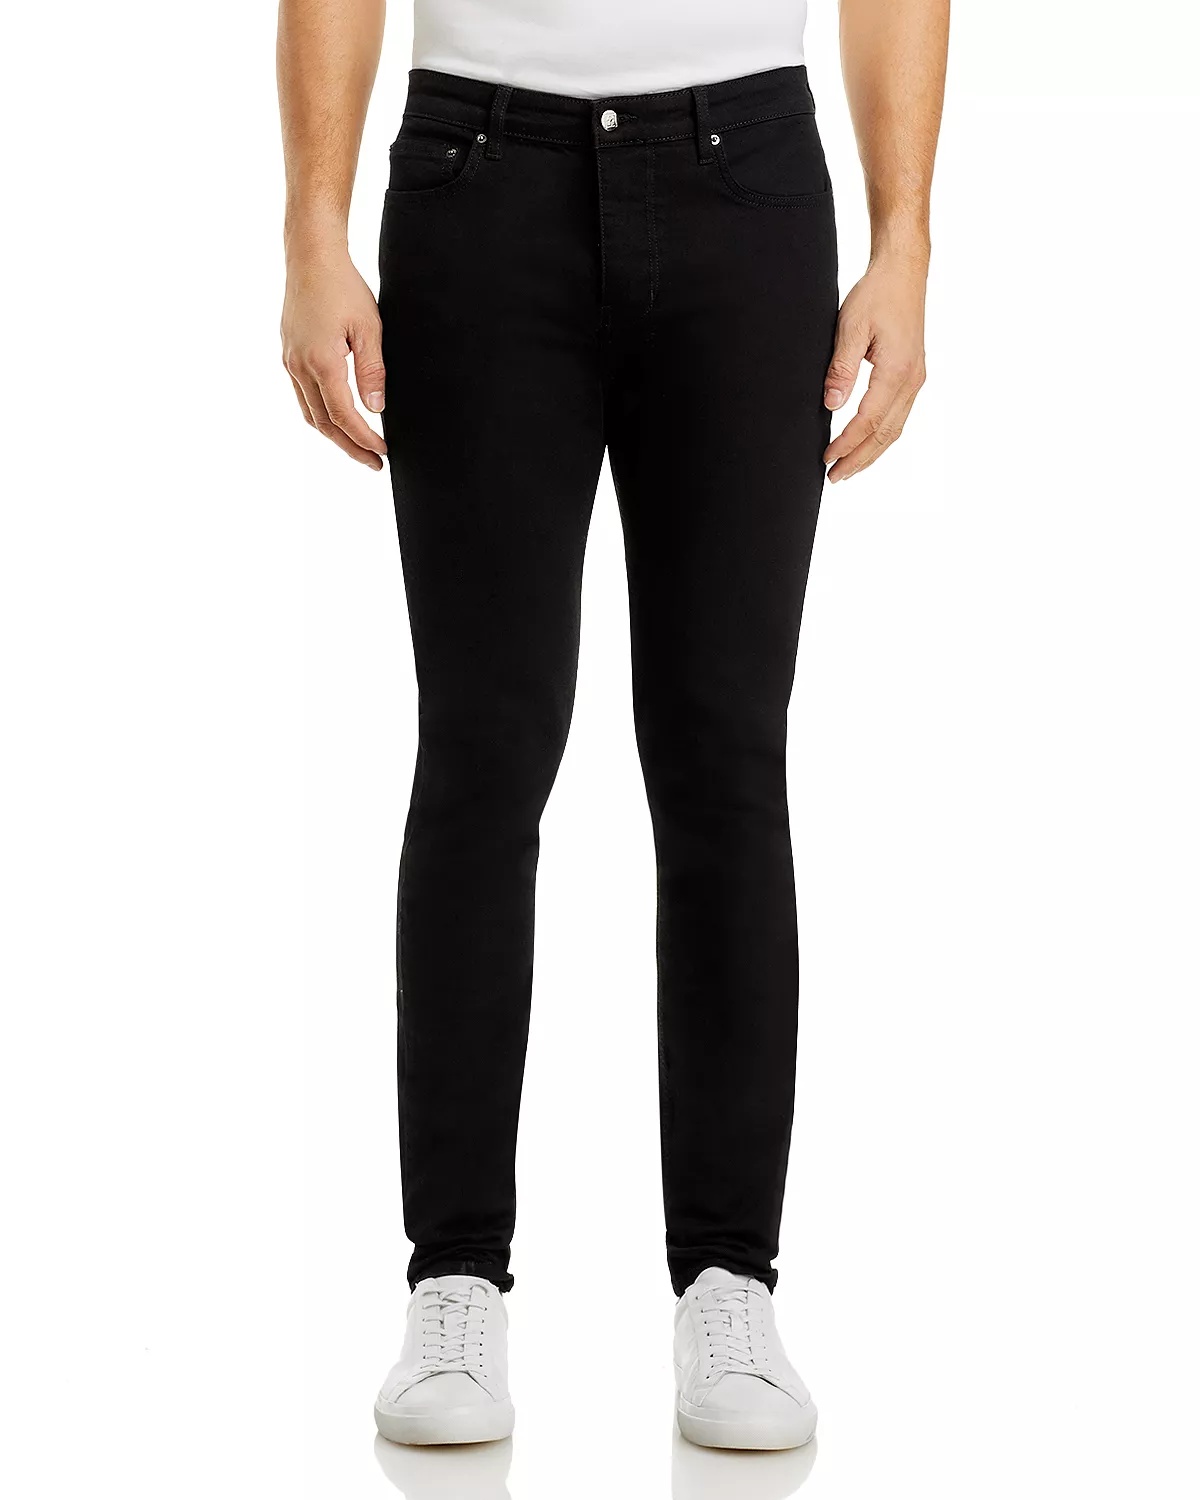 Chitch Slim Fit Jeans in Laid Black - 3